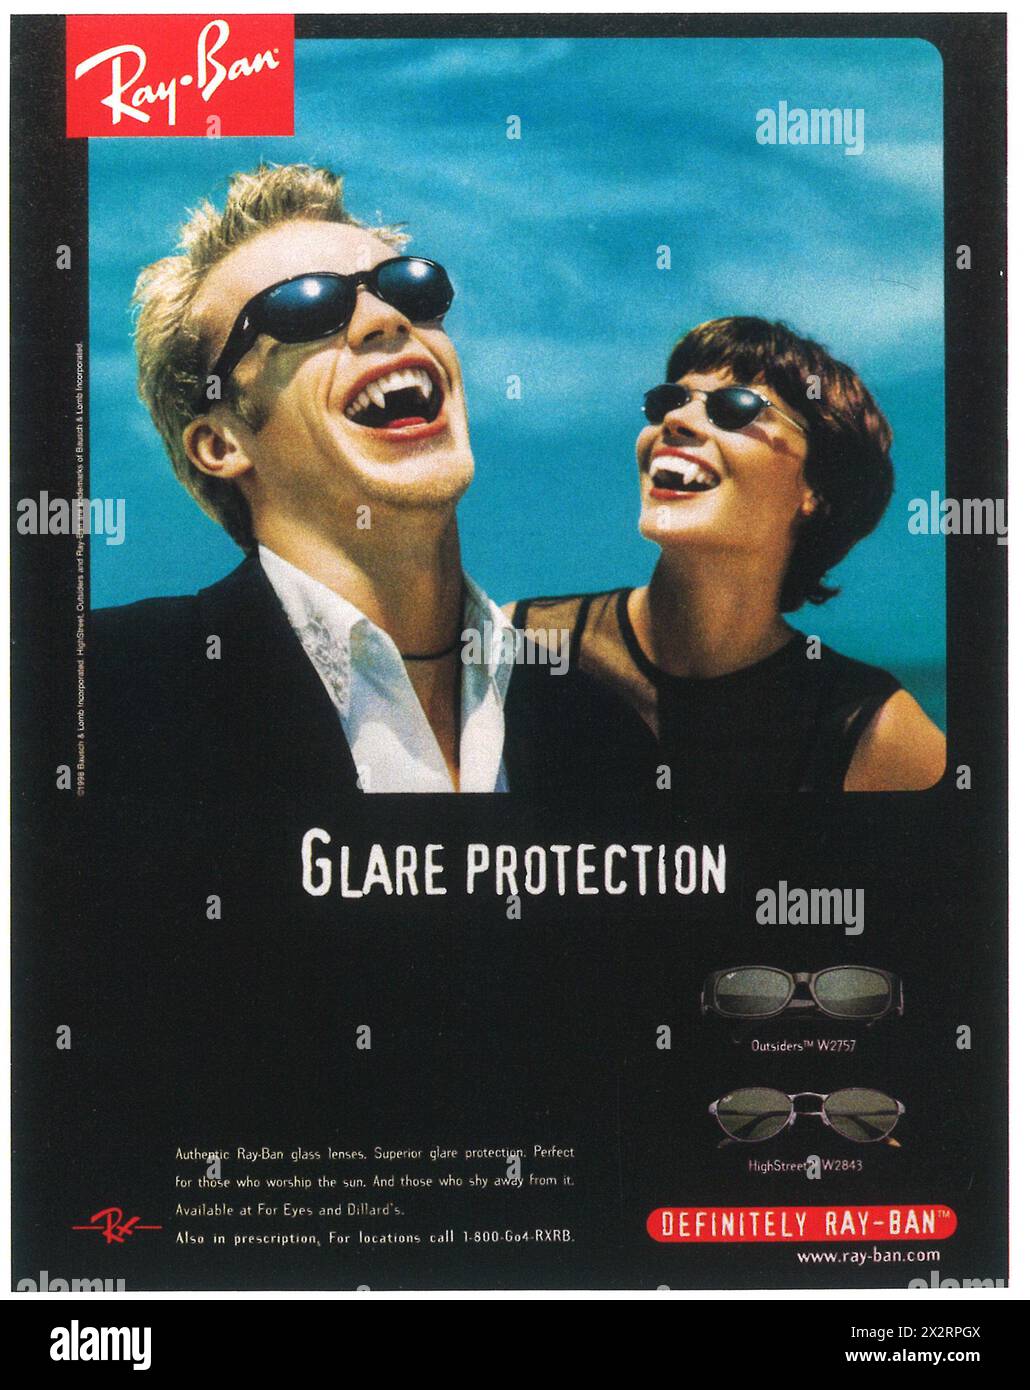 1998 Ray-Ban Sunglasses Ad - Glare Protection Vampires Out During the Day Stock Photo